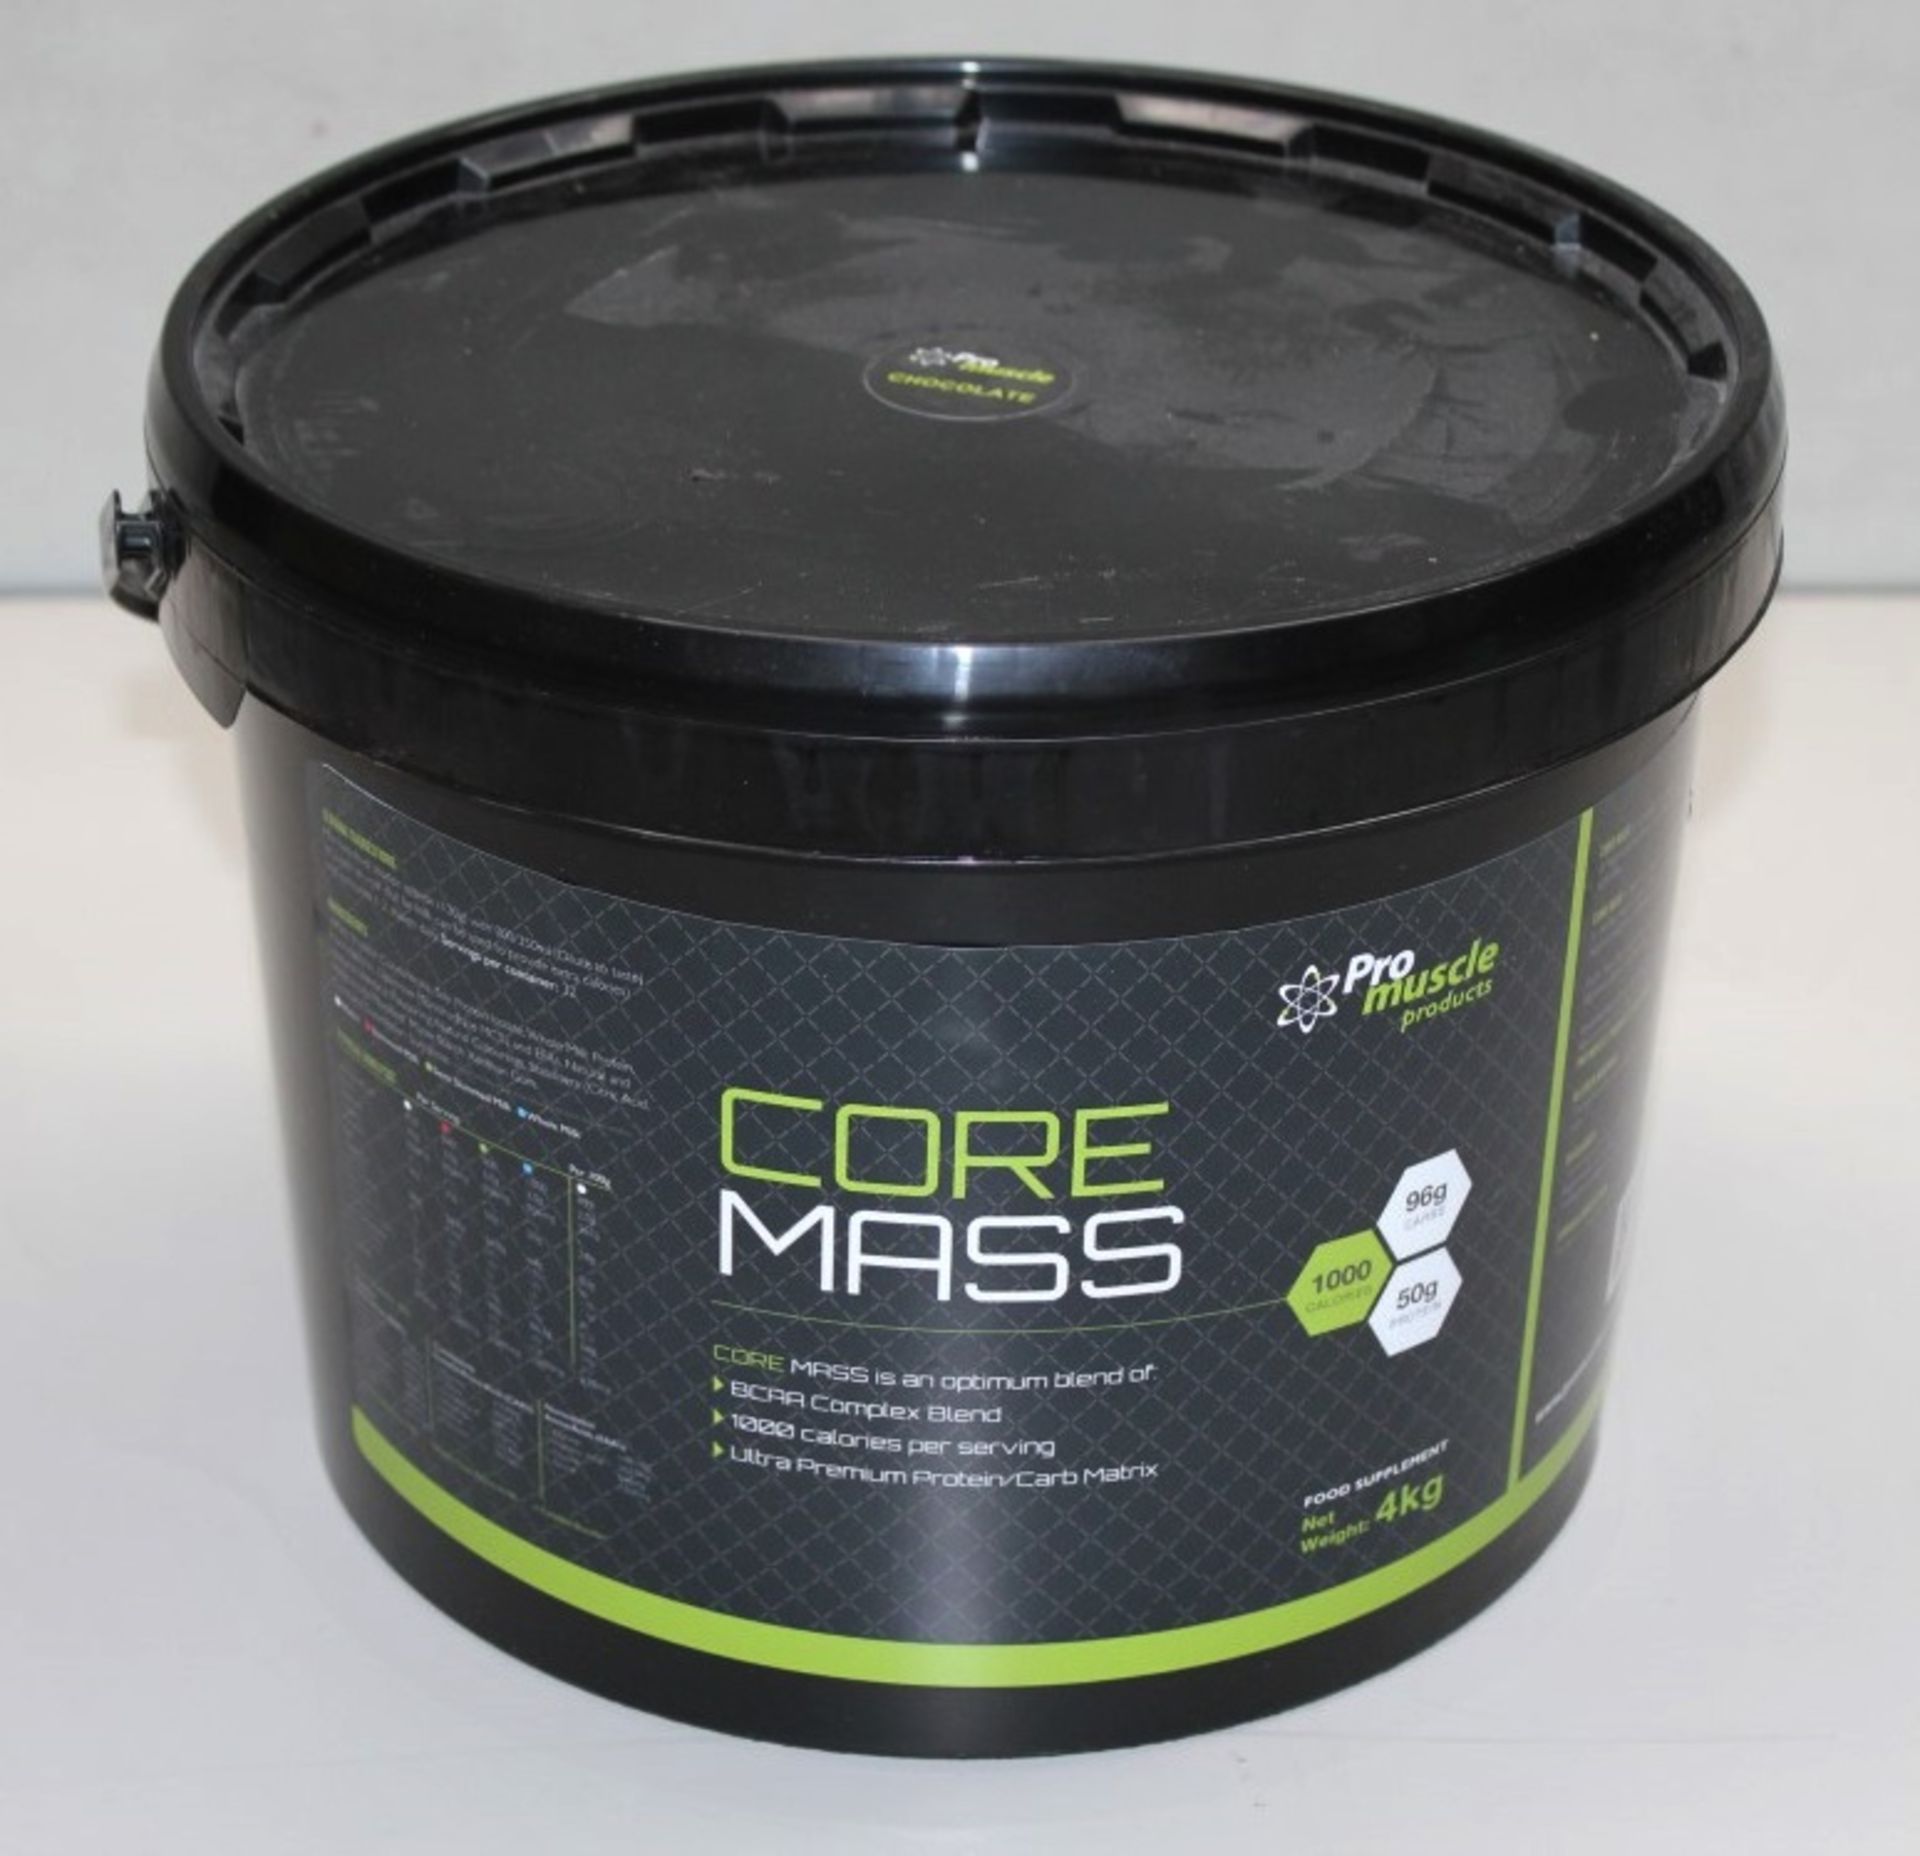 1 x Pro Muscle CORE MASS GAINER Food Supplement (4KG) - Flavour: Chocolate - New Sealed Stock - Best - Image 2 of 4